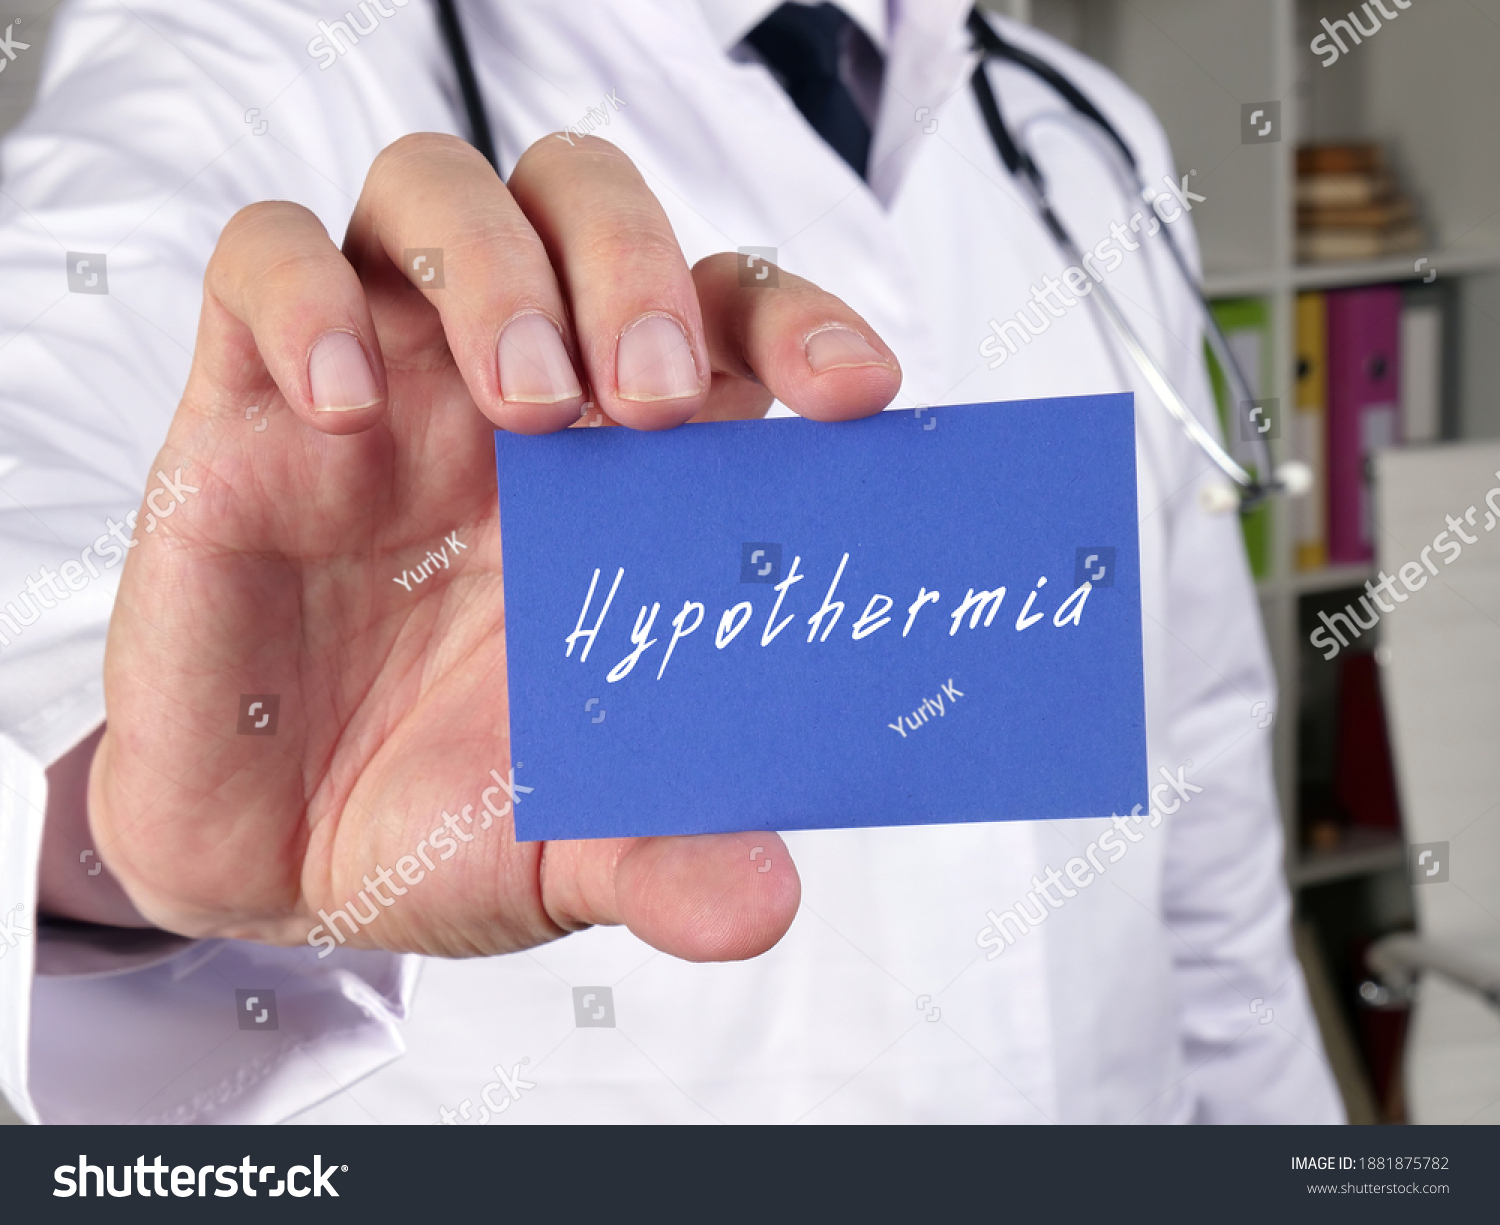 Health care concept about Hypothermia with sign on the sheet.
 #1881875782